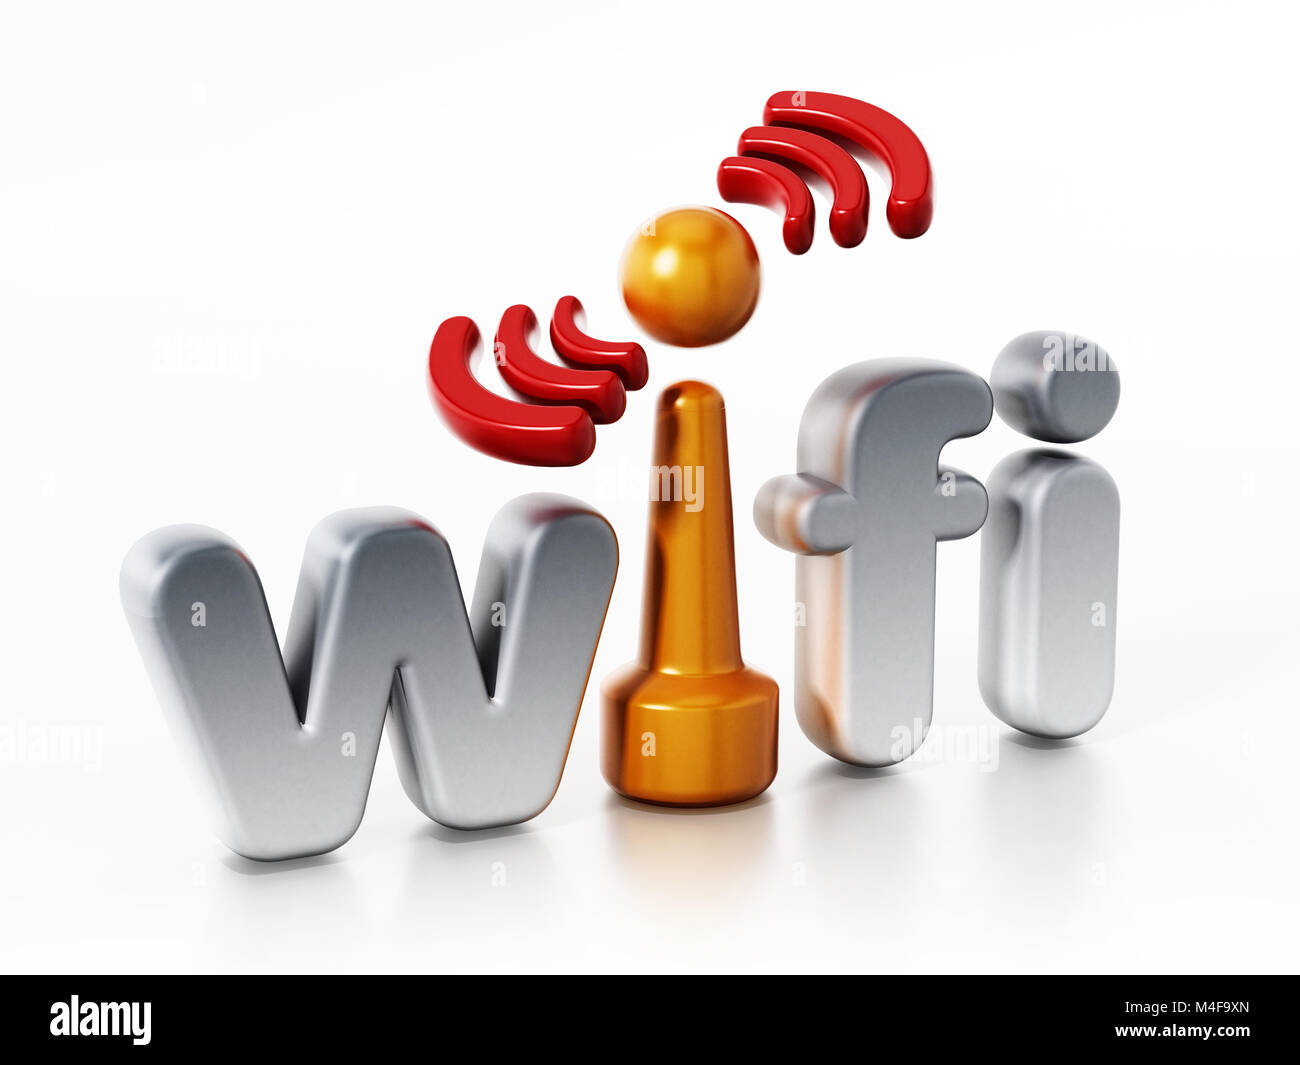 Wifi logo and wireless connection symbol. 3D illustration. Stock Photo